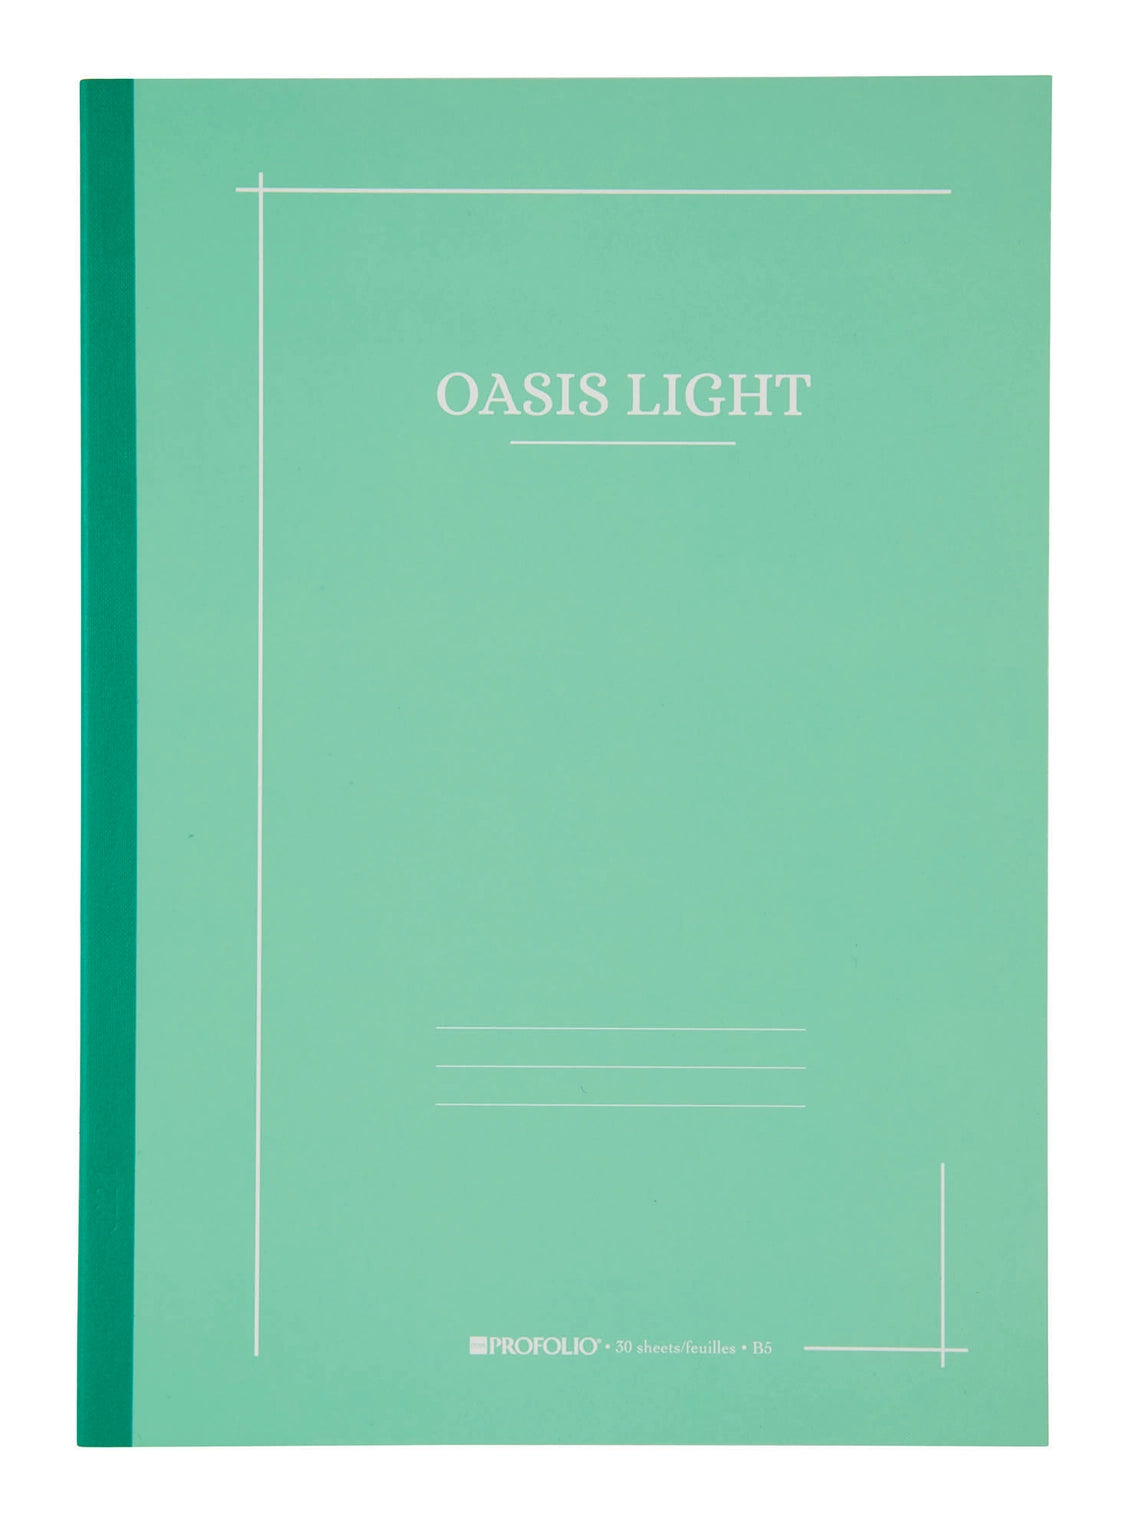 Oasis Light Notebook by Profolio